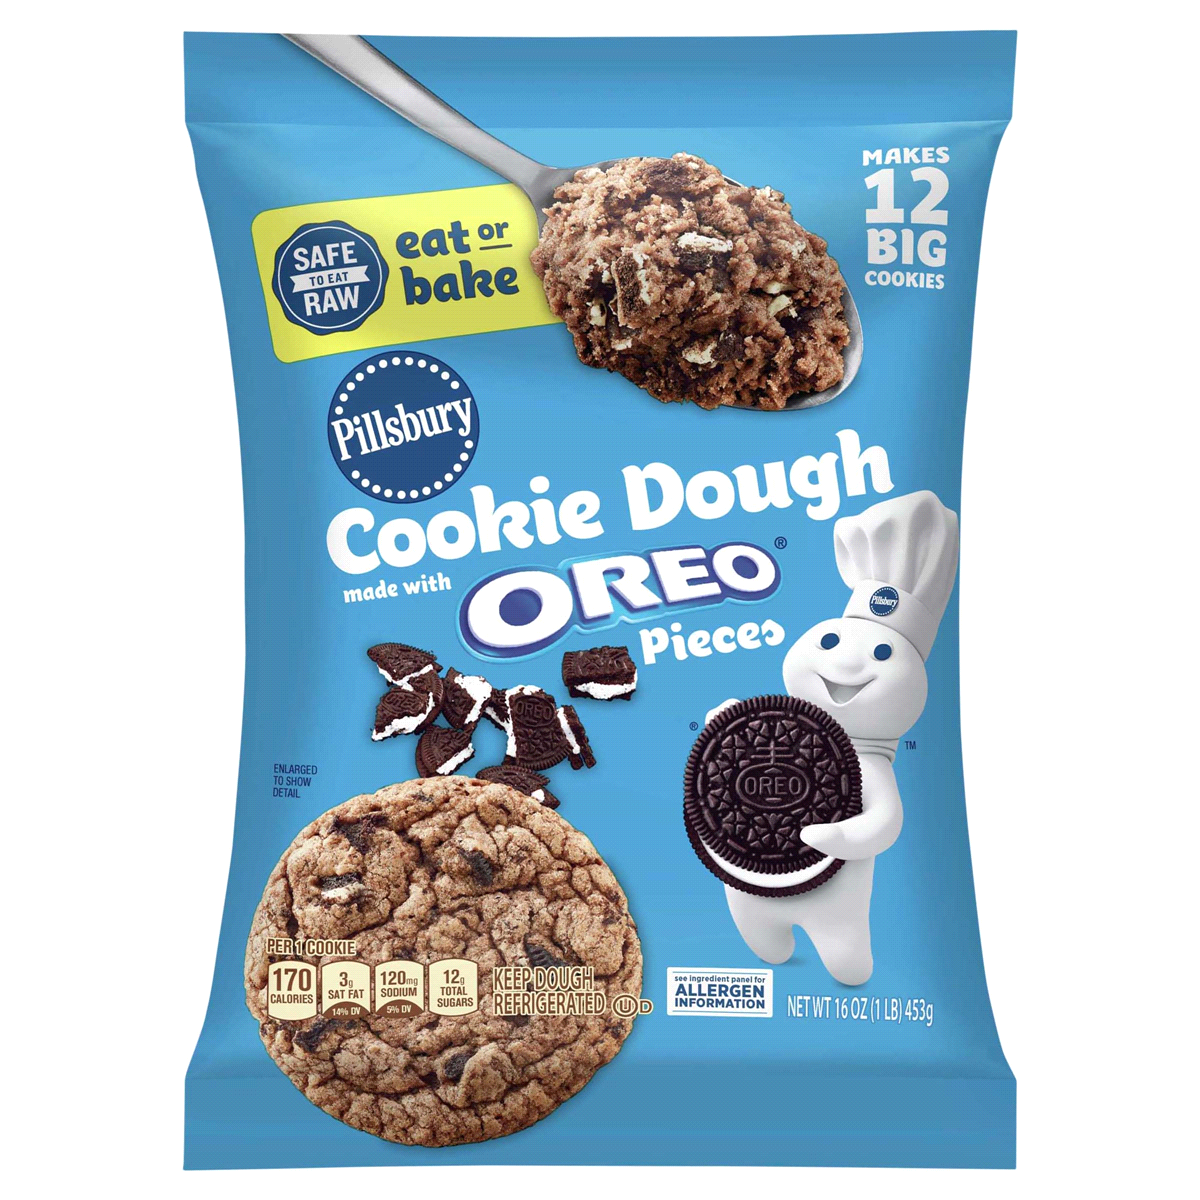 slide 1 of 1, Pillsbury Refrigerated Cookie Dough Made With OREO Pieces, Eat or Bake, 12 Big Cookies, 16 oz, 16 oz